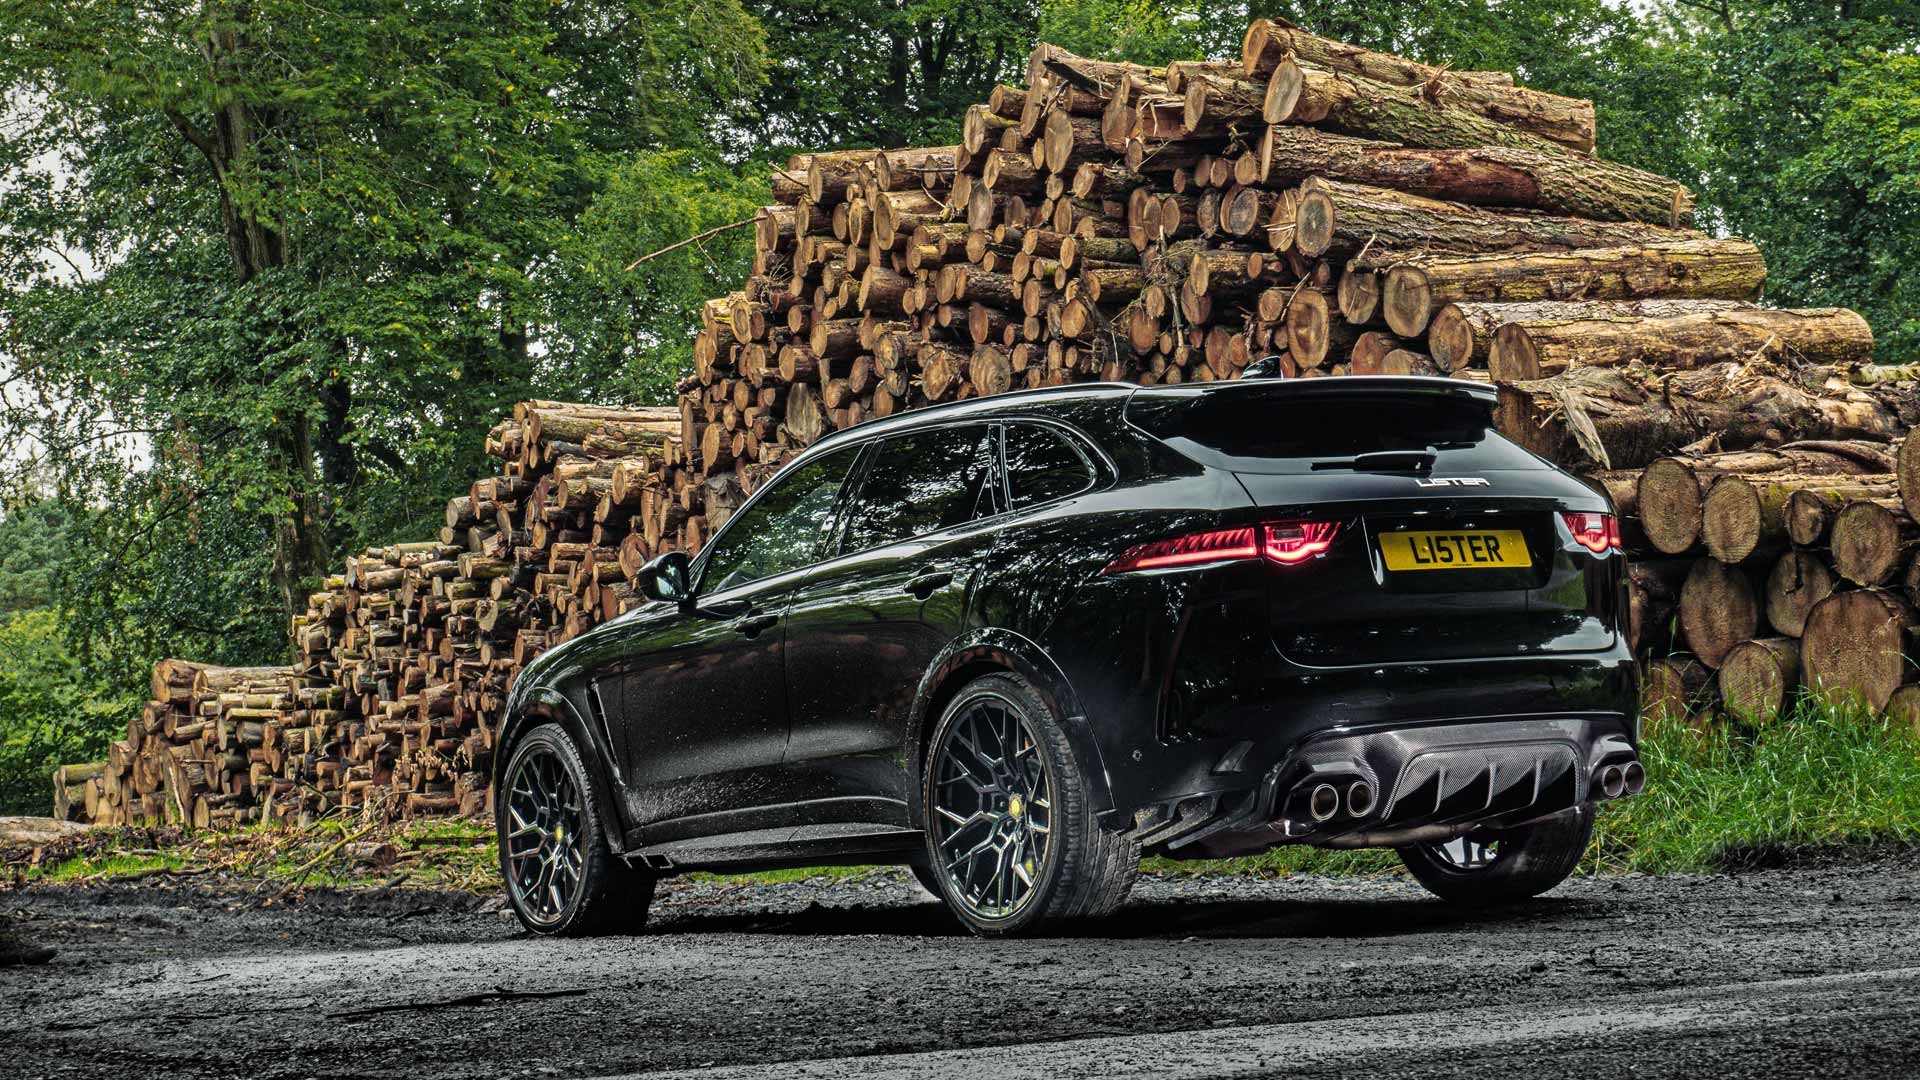 Lister Stealth Fastest SUV in UK